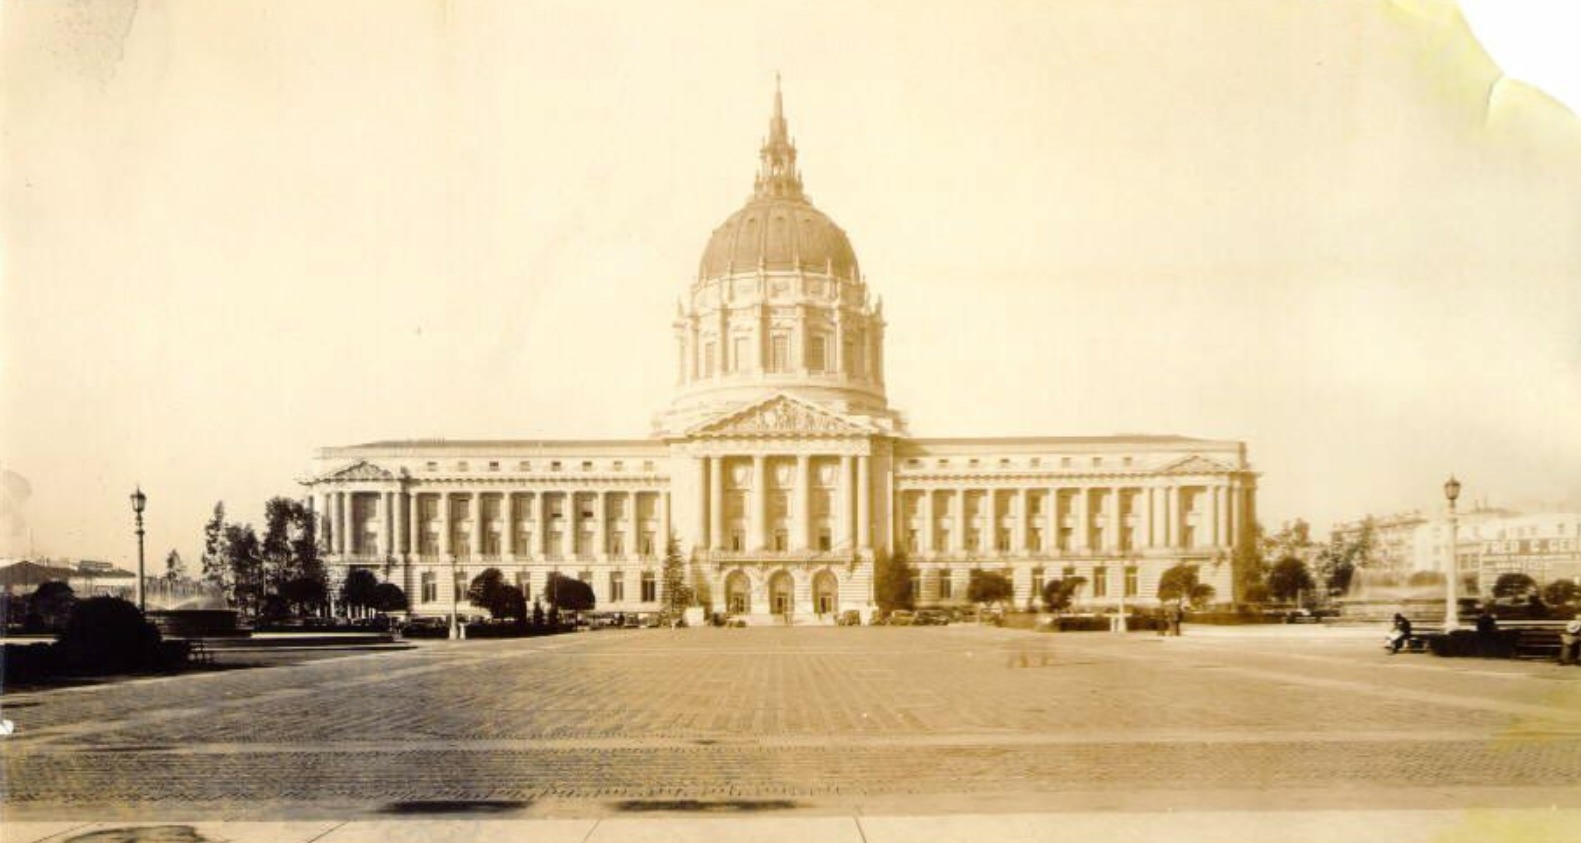 Civic Center in the 1920s